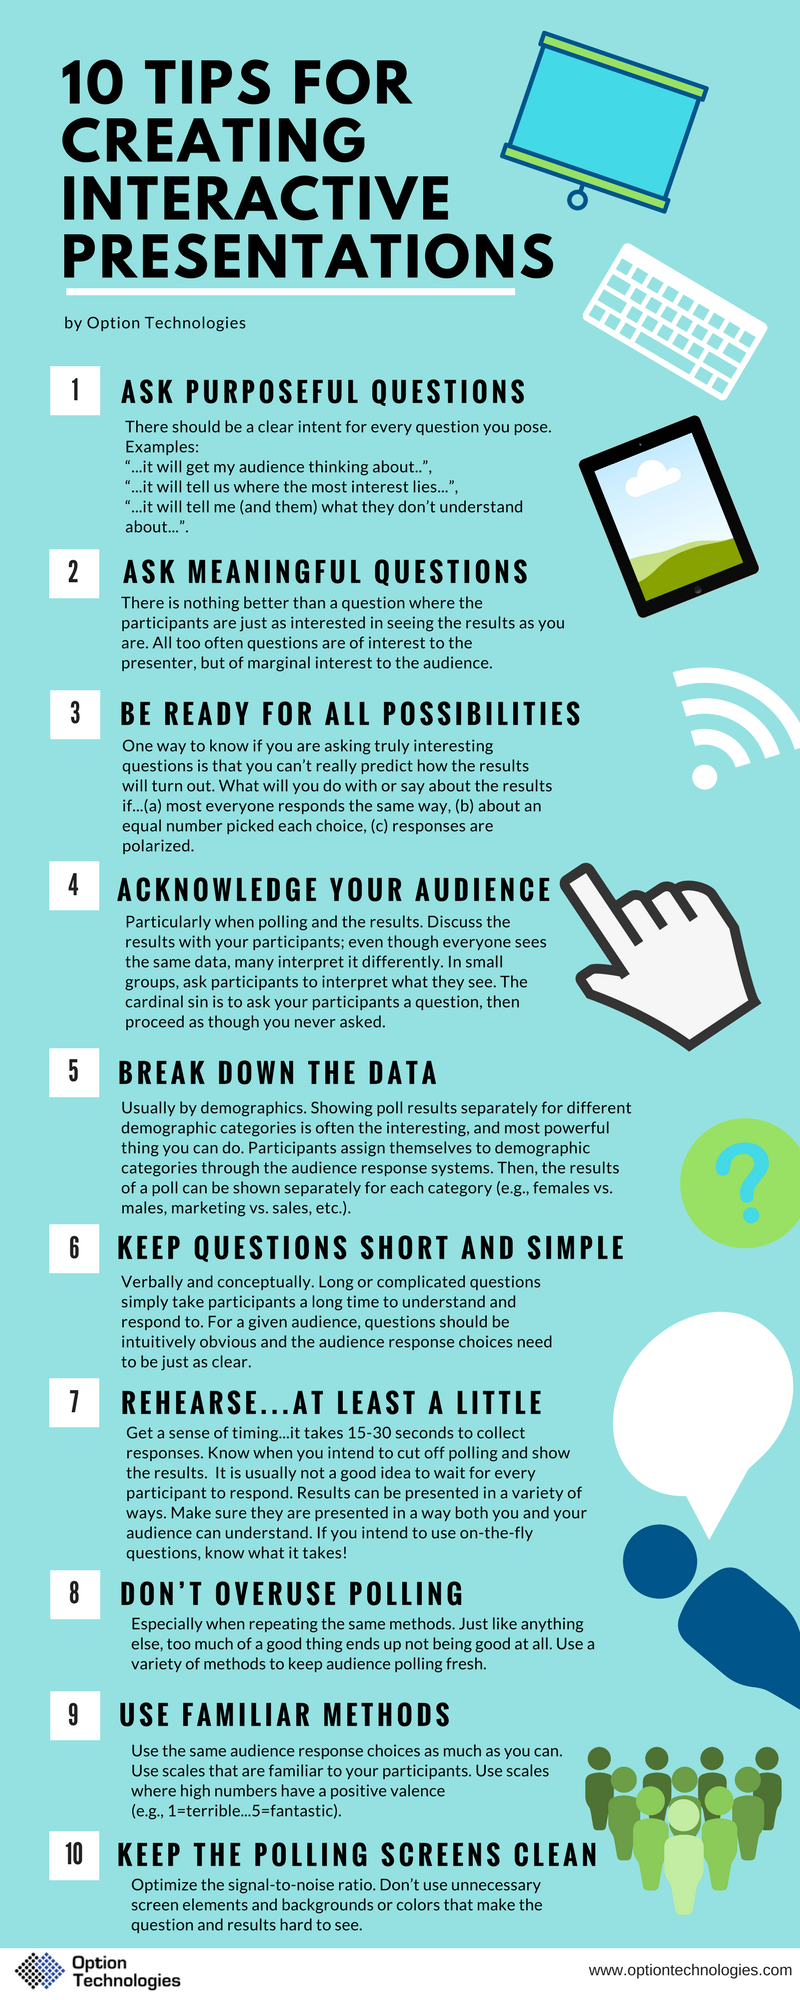 10 tips for creating an interactive presentation (infographic)